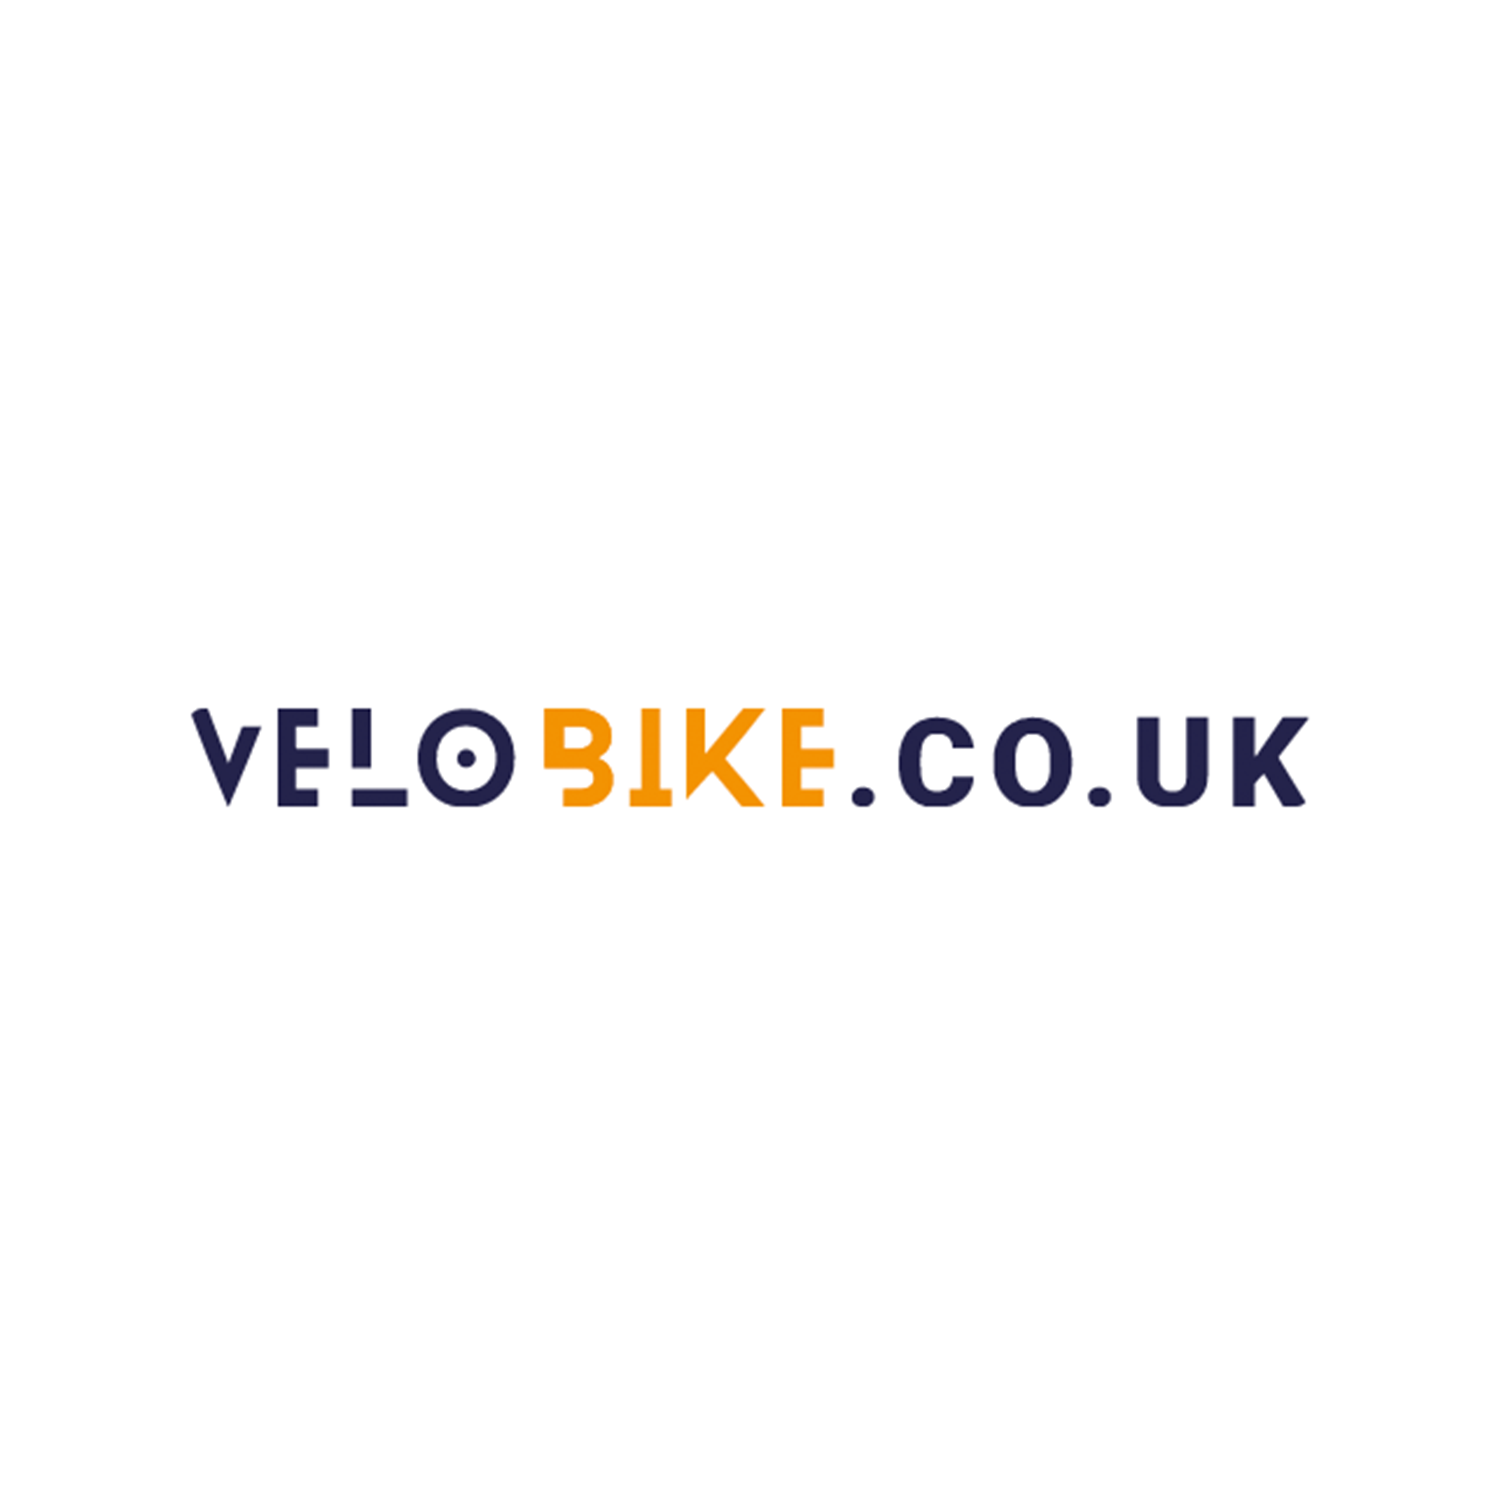 Velobike ~ What is a moped?